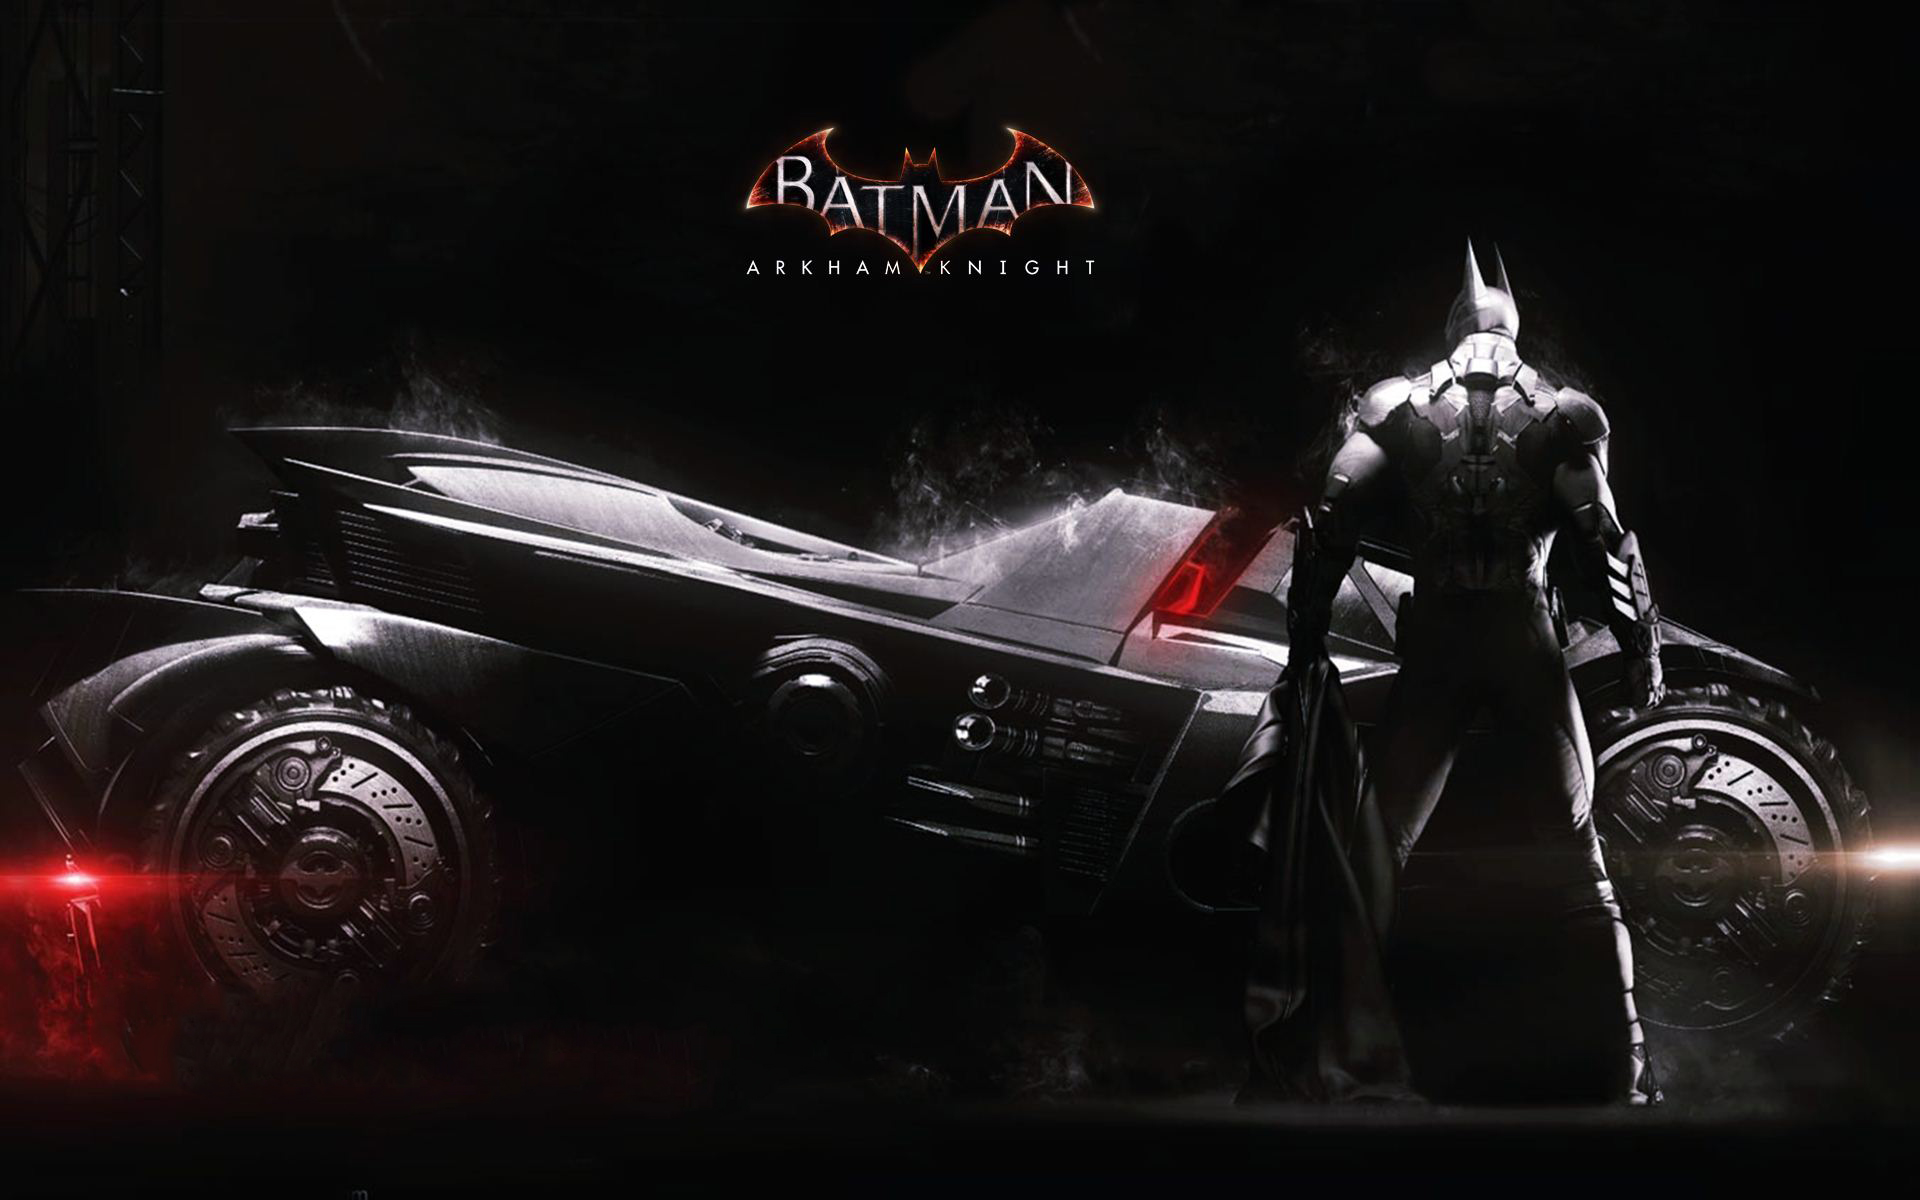  Catwoman Revealed In Teaser For The New BATMAN ARKHAM KNIGHT Trailer